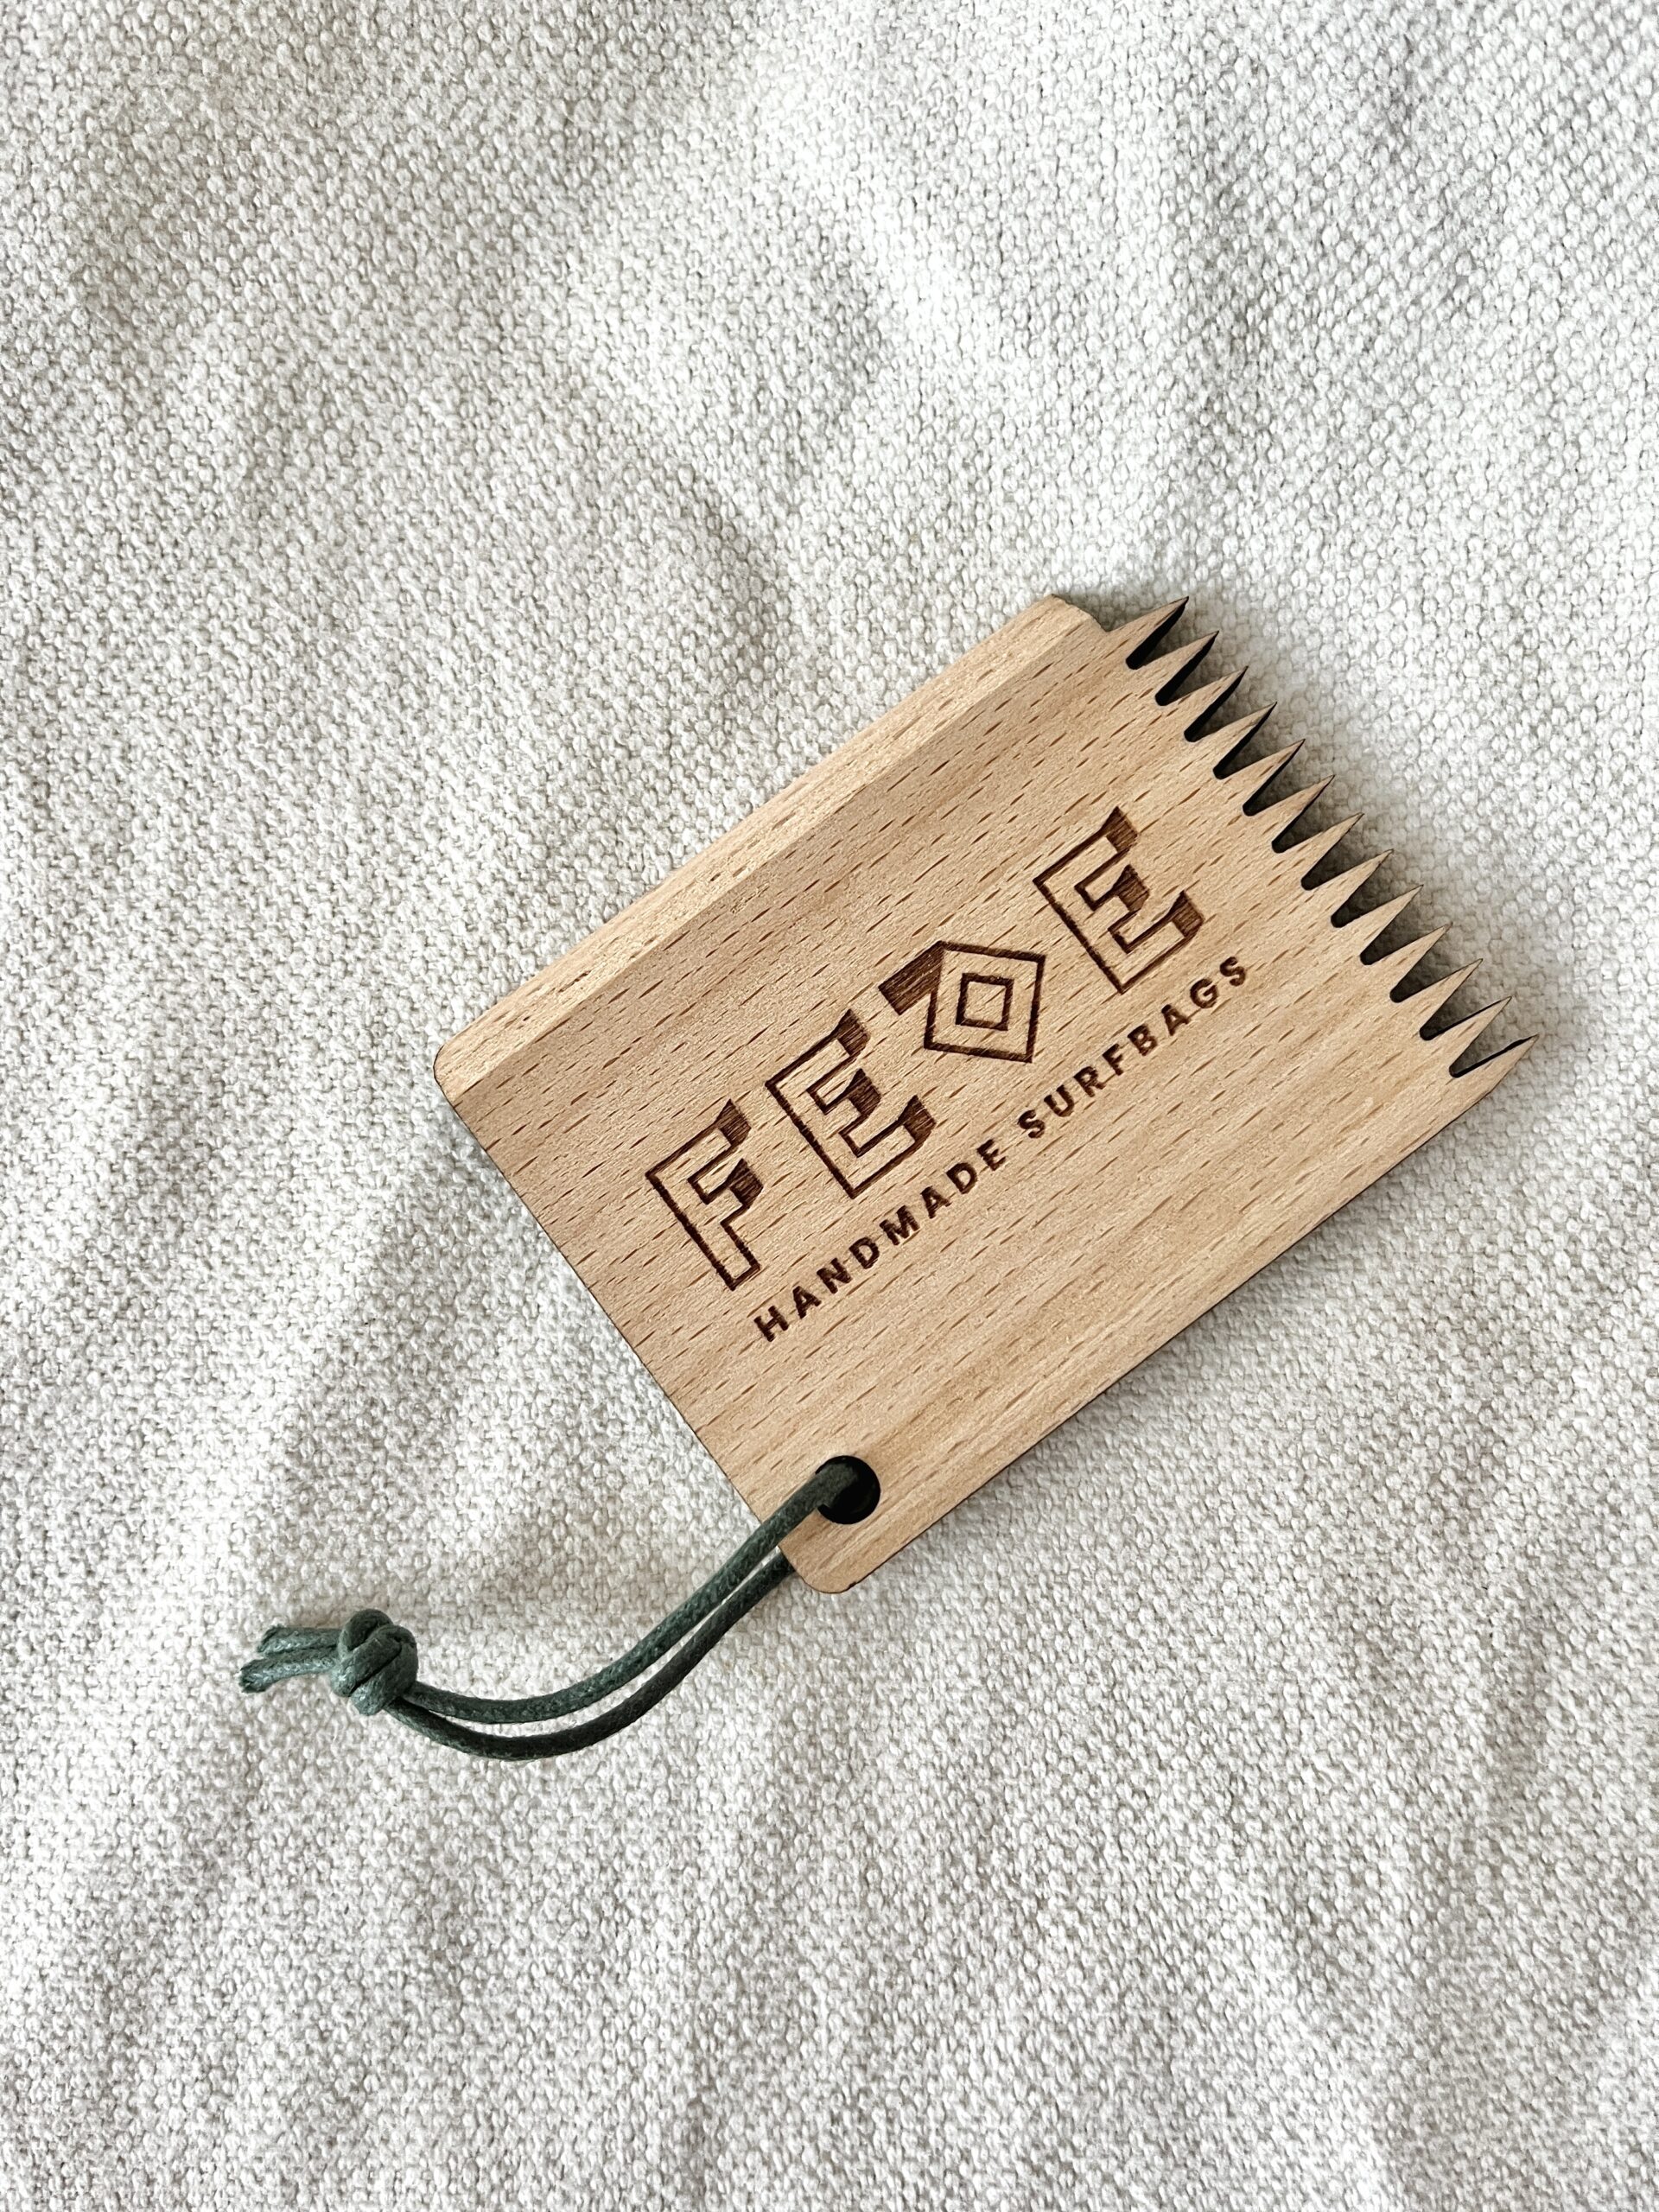 Wooden Surf Wax Comb - Pettino Surf by Fede Surfbags